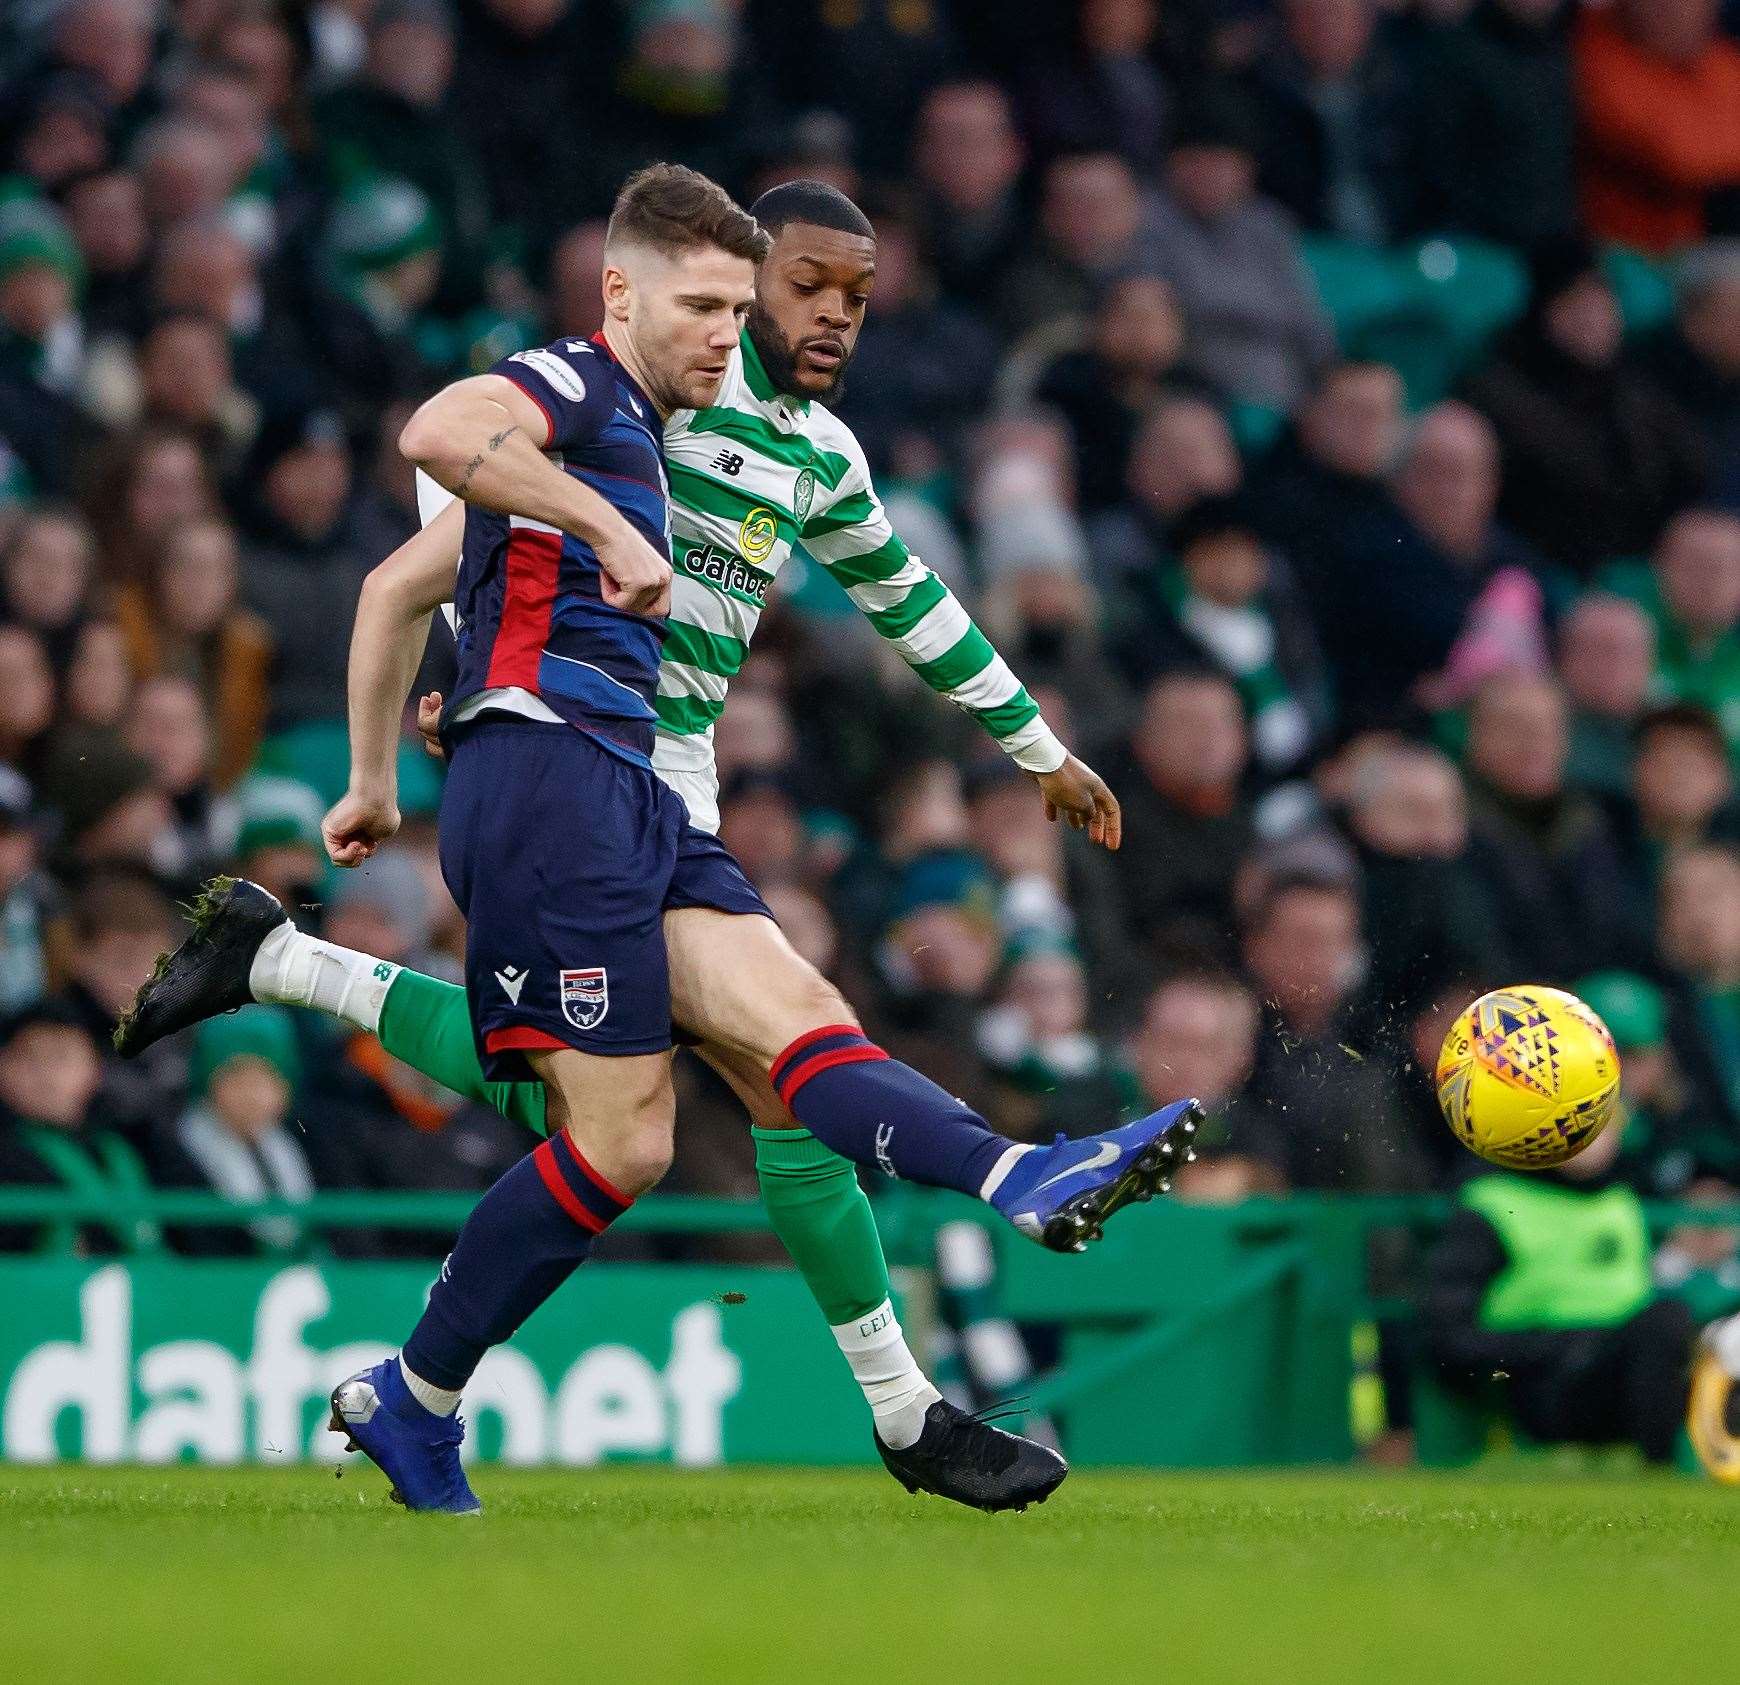 Picture - Ken Macpherson, Inverness. Celtic(3) v Ross County(0). 26.01.20. Ross County's Iain Vigurs clears from Celtic's Olivier Ntcham.